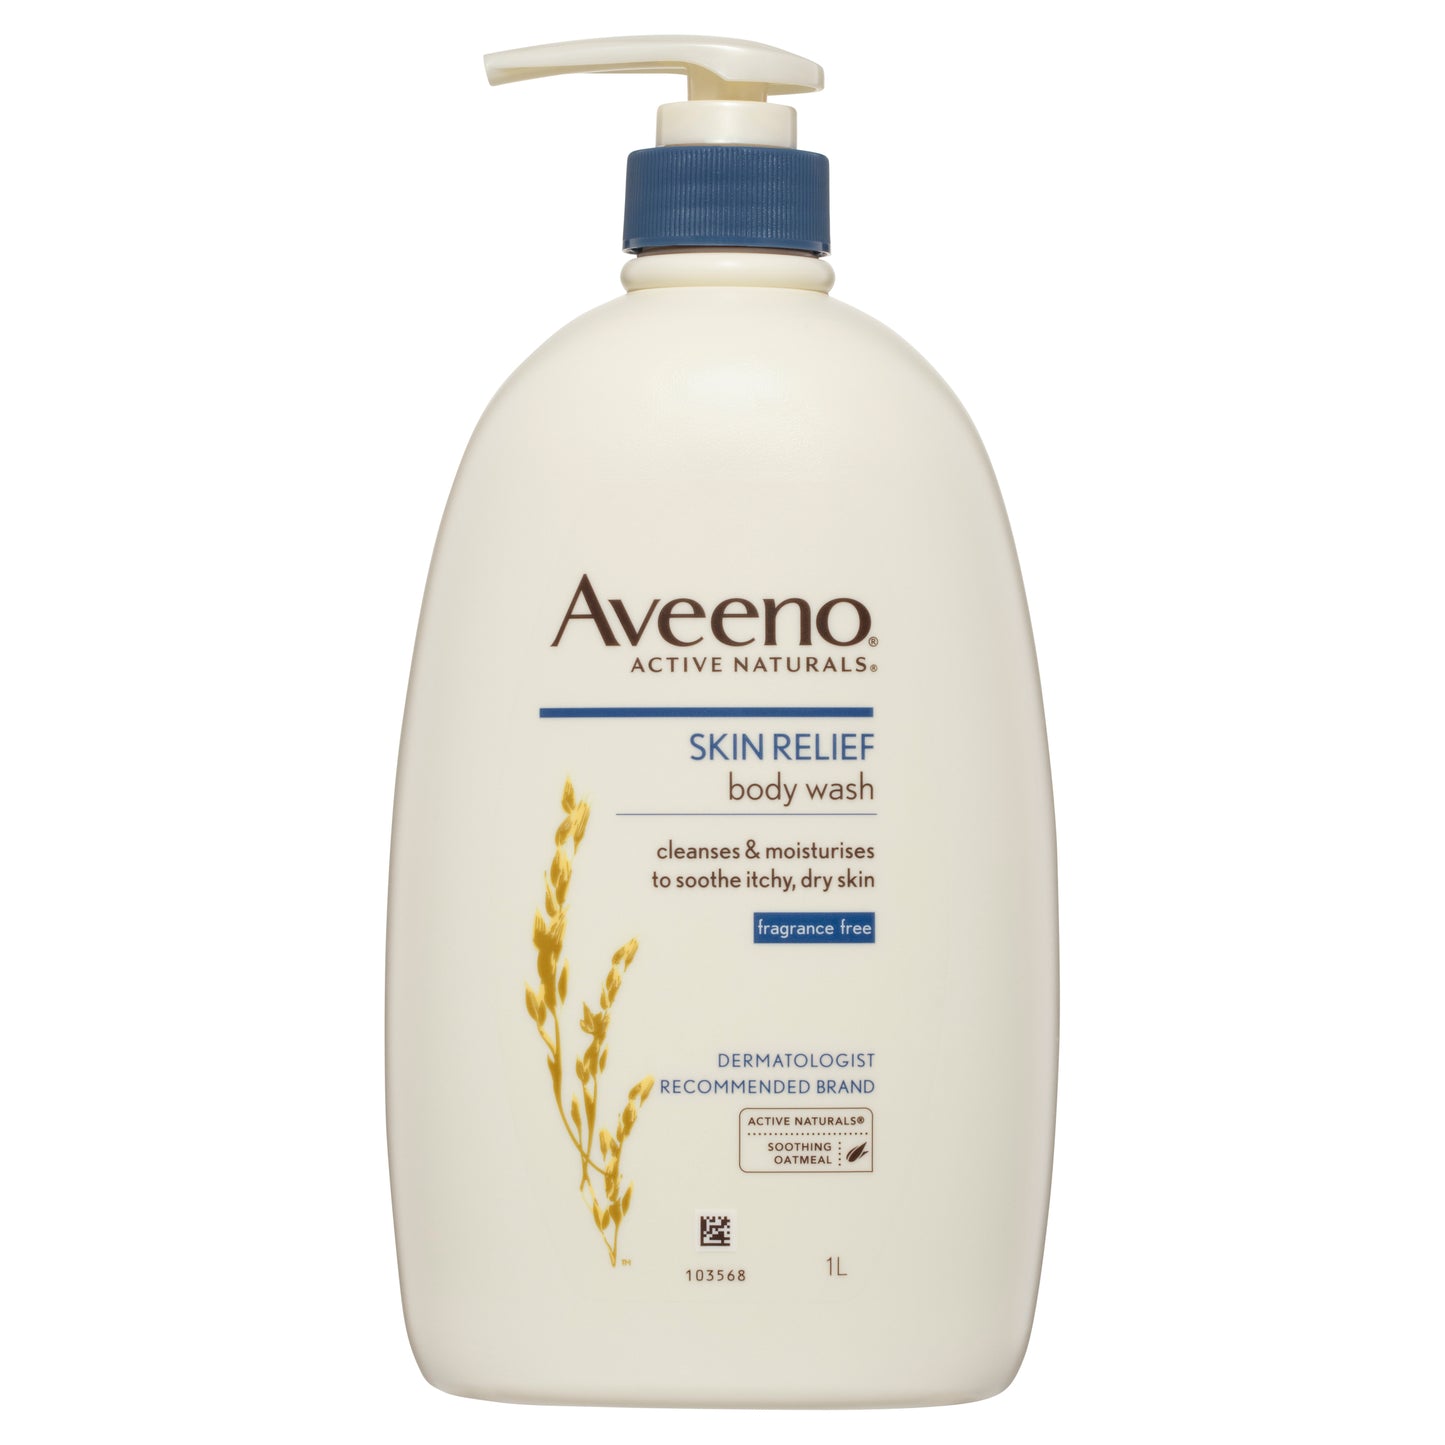 Aveeno Active Naturals Skin Relief Fragrance Free Body Wash 1L